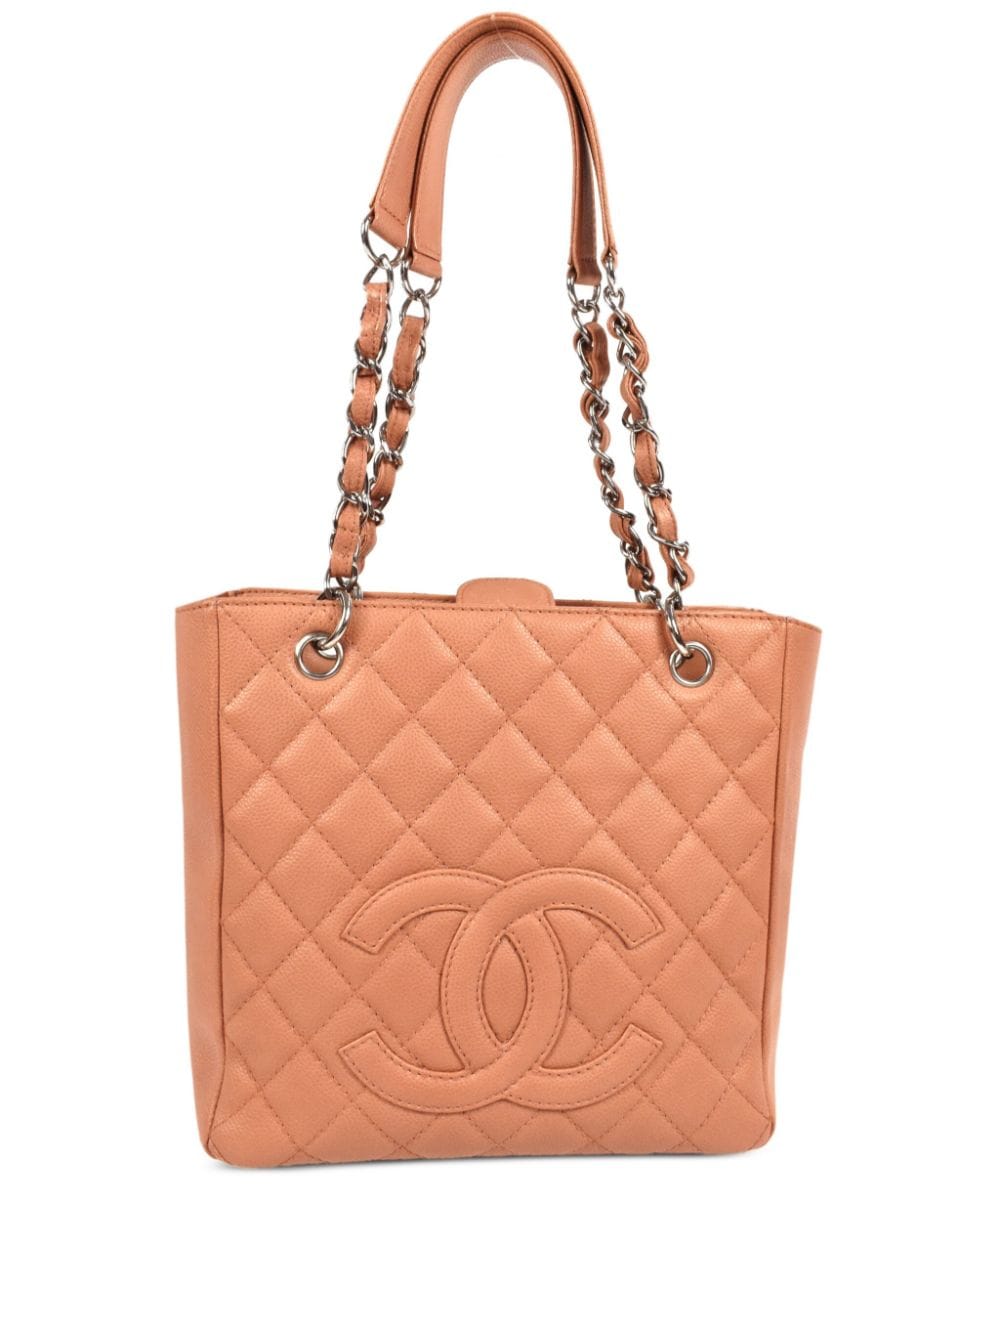 CHANEL Pre-Owned 2008 Petit Shopping Handtasche - Orange von CHANEL Pre-Owned